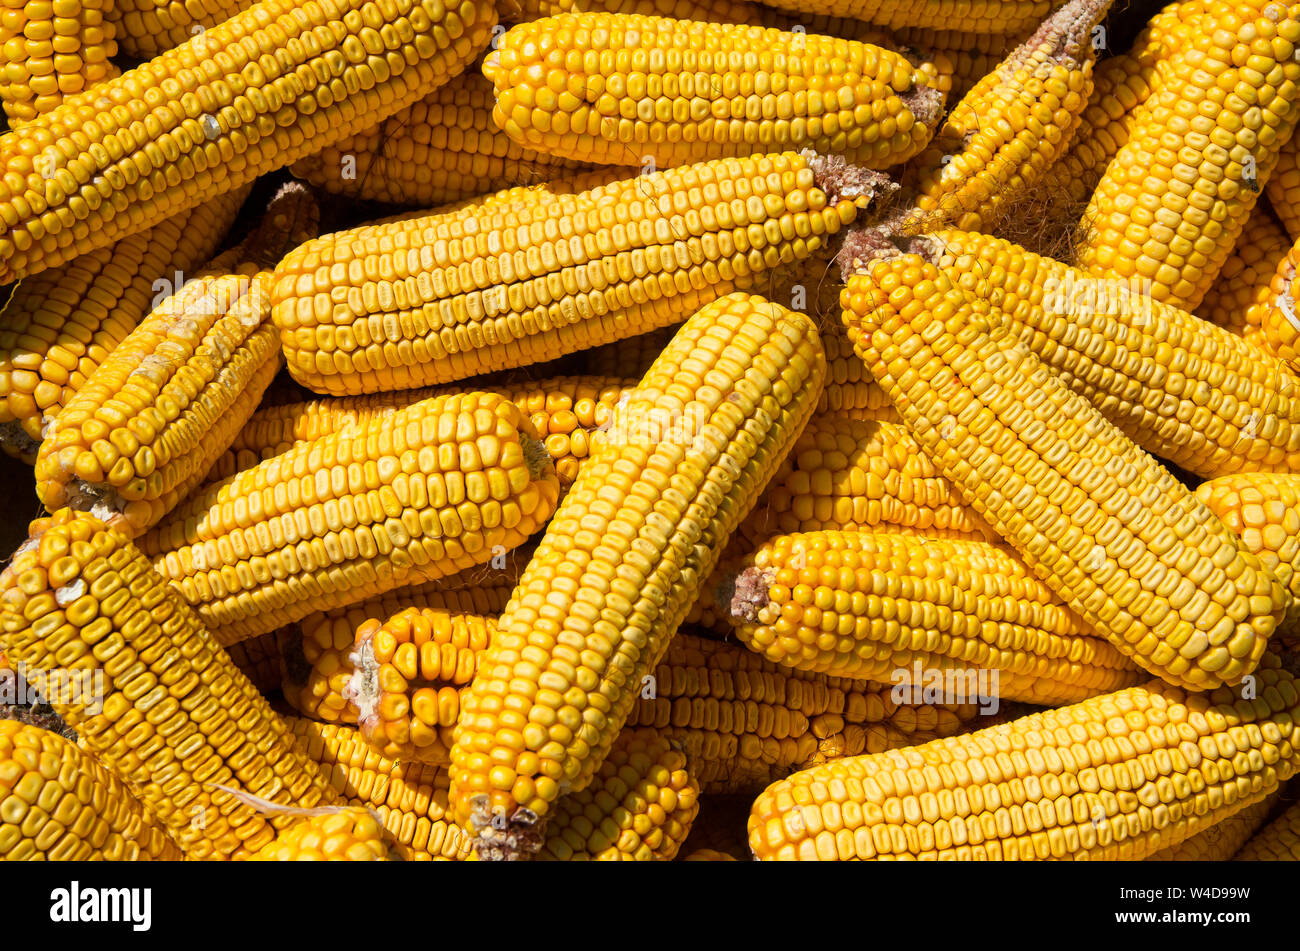 Corn on cobs closeup. Grains of ripe maize. Forage mealies seed. Export and import of grain. Stock Photo